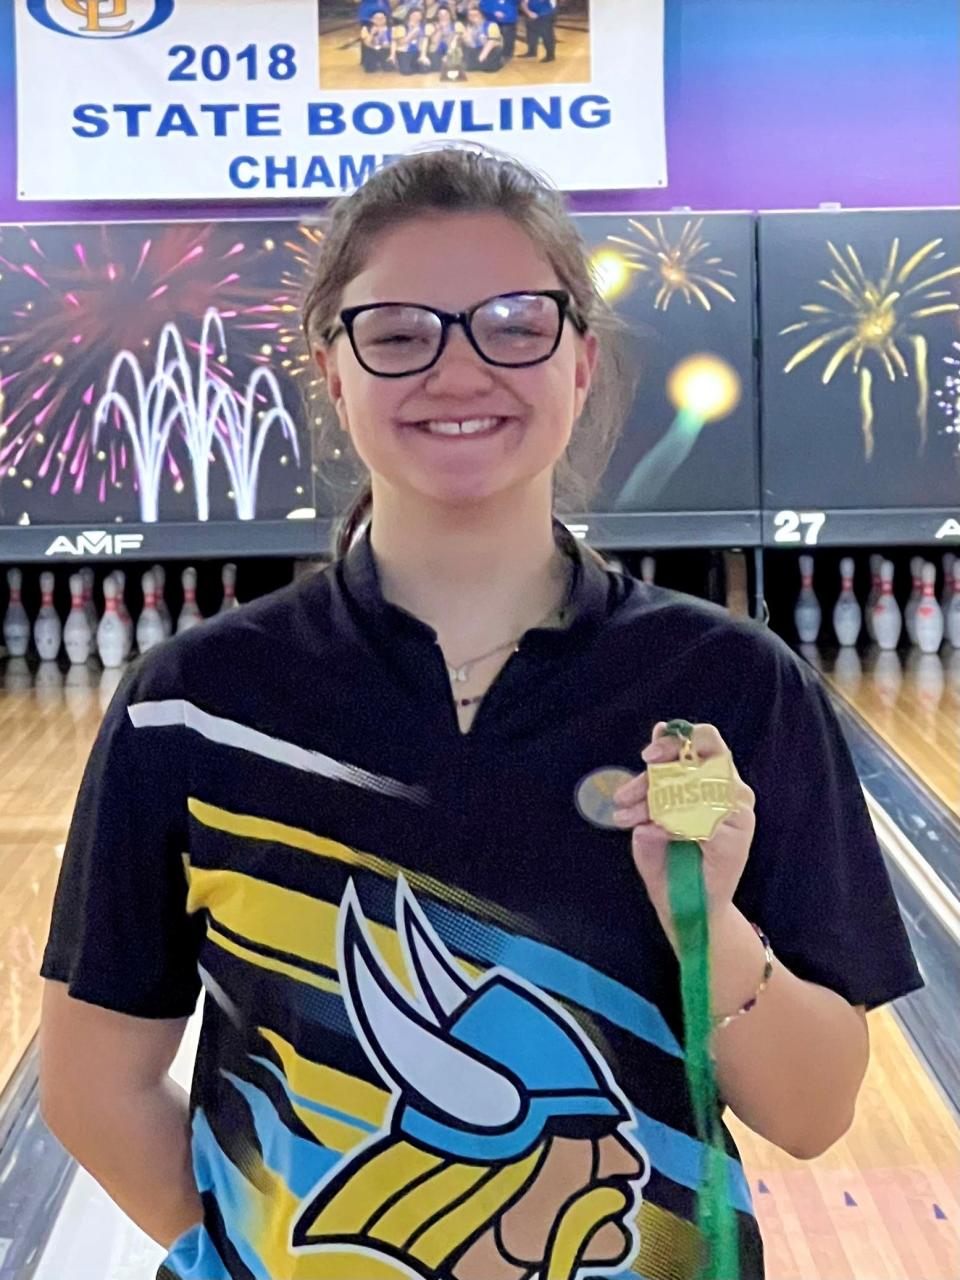 River Valley's Alexis Manning, shown with her district championship medal, finished as a Division II girls bowling state runner-up with a 662 three-game series Saturday at HP Lanes.